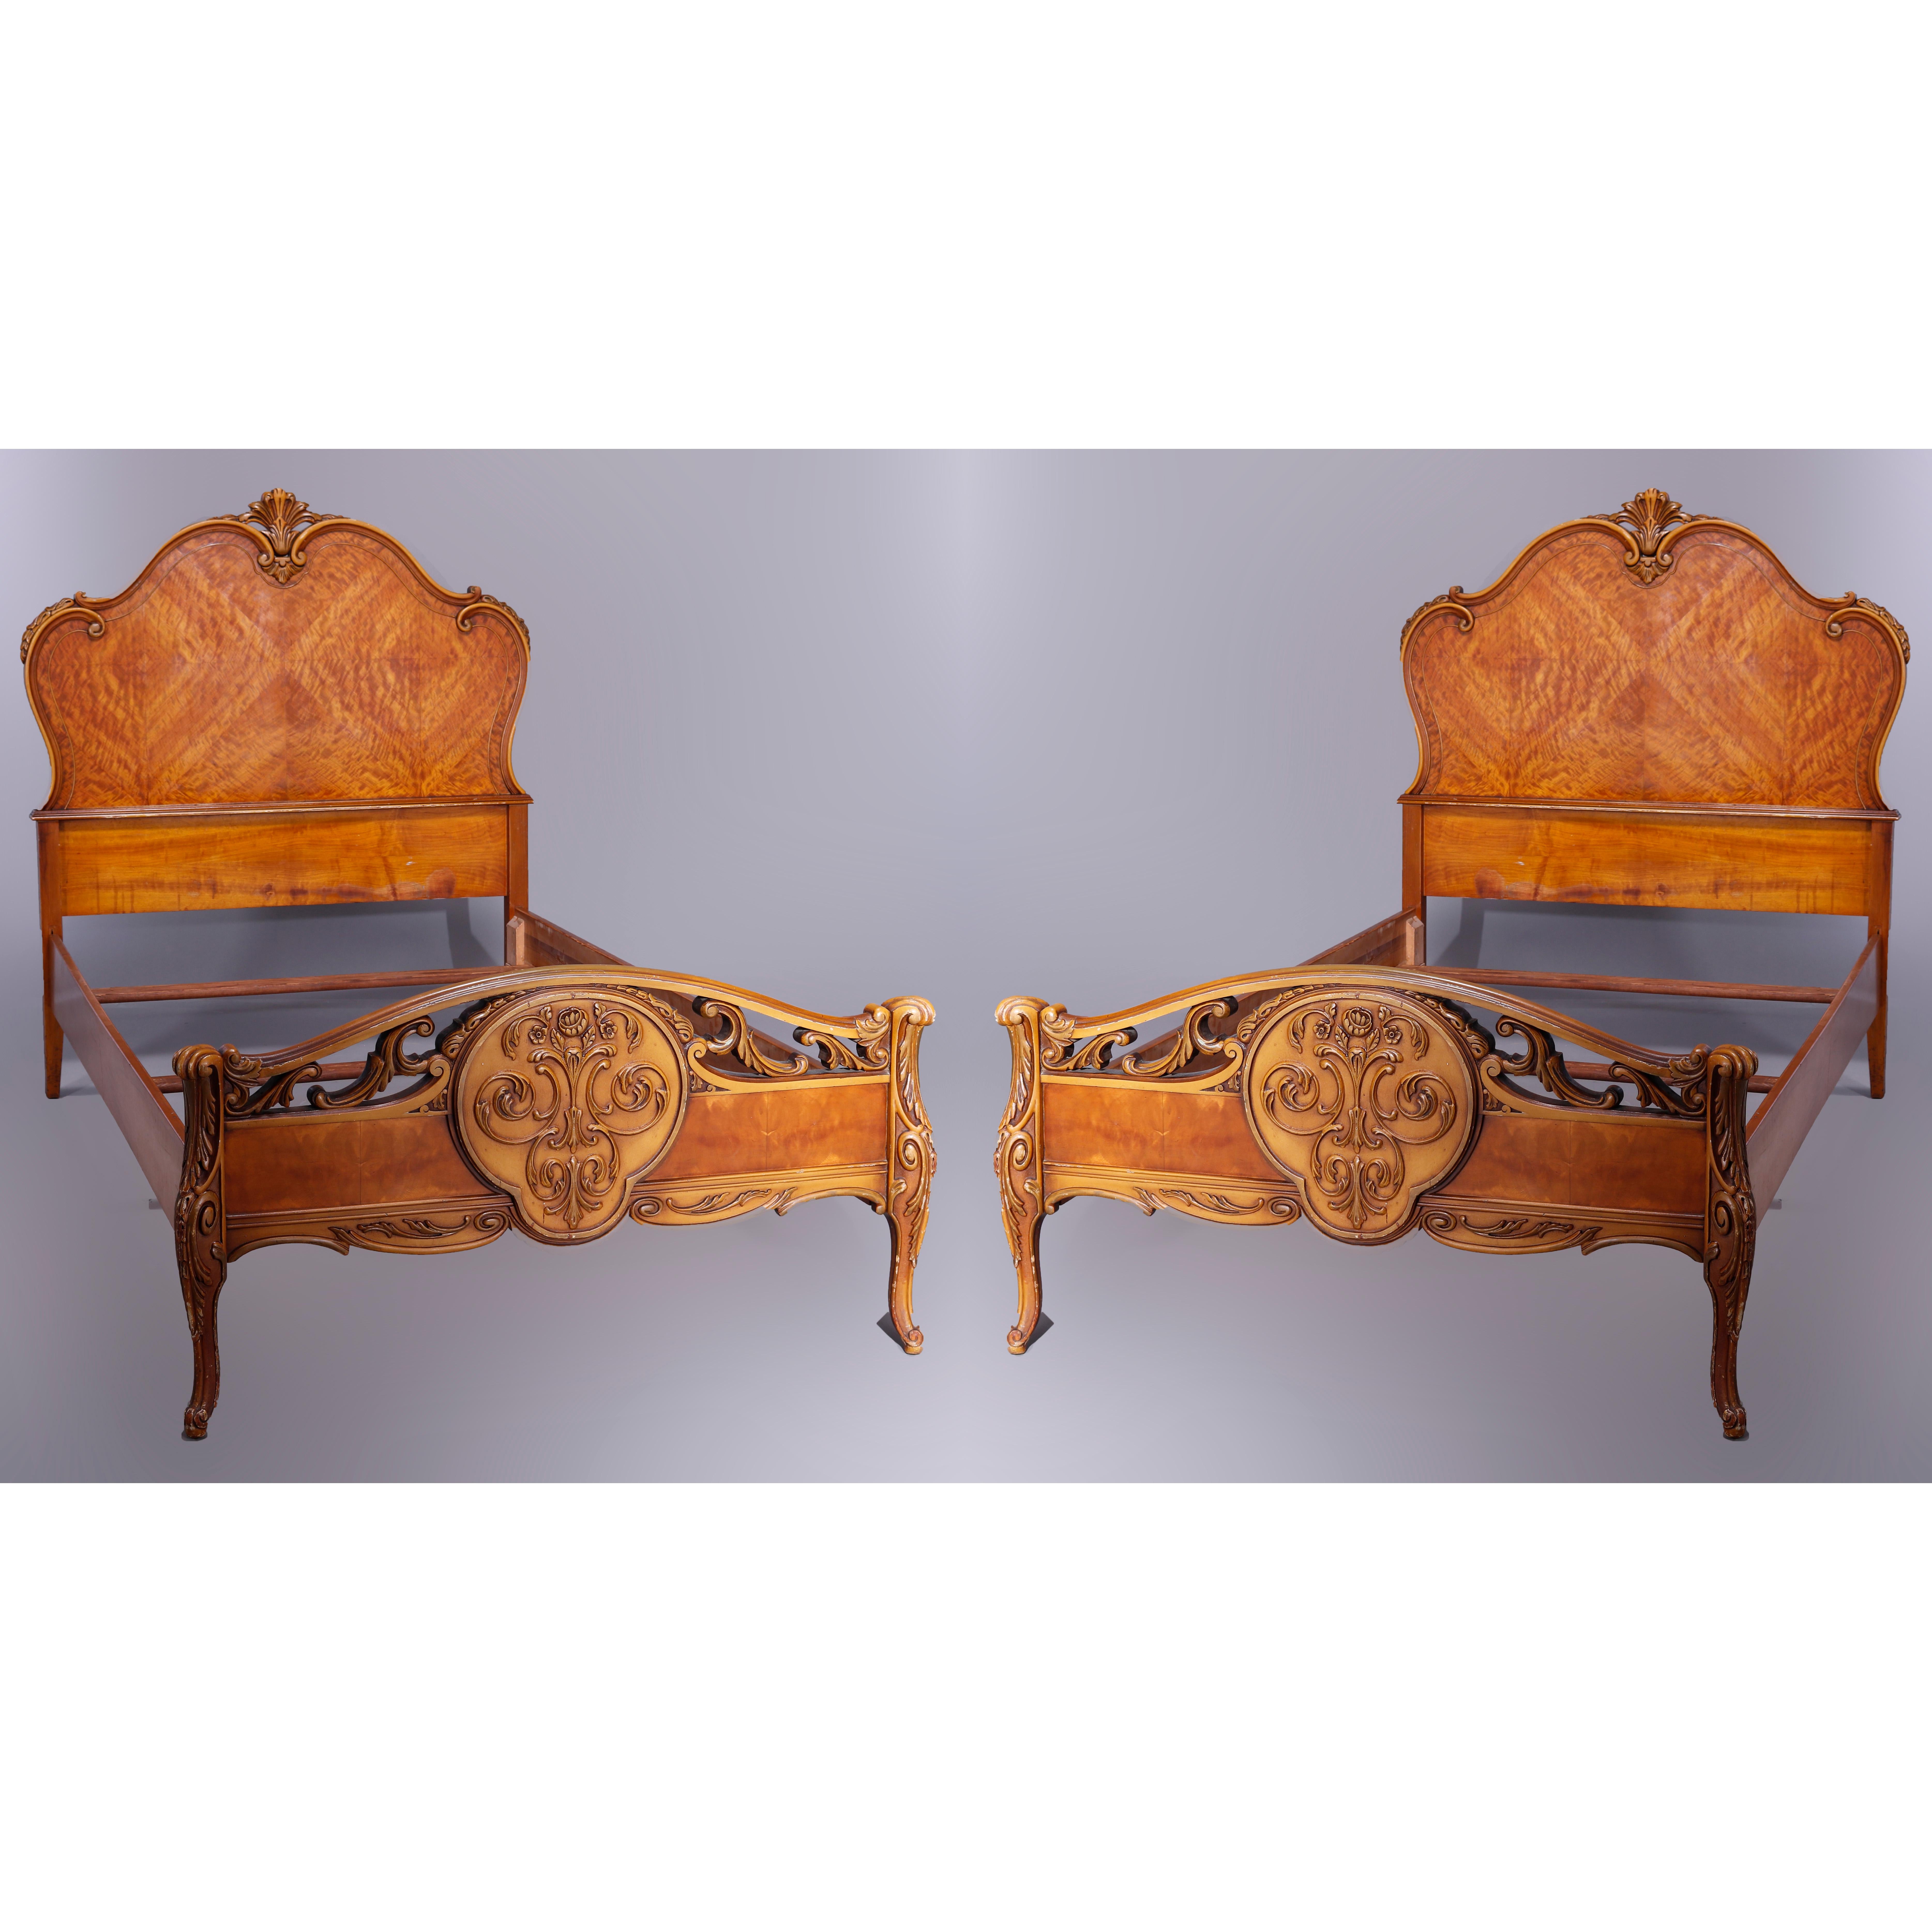 An antique pair of French style twin bed frames offer shaped head and foot boars with bookmatched satinwood facing, carved and pierced foliate elements, carved medallion of footboard having scrolled foliate elements, raised on cabriole legs